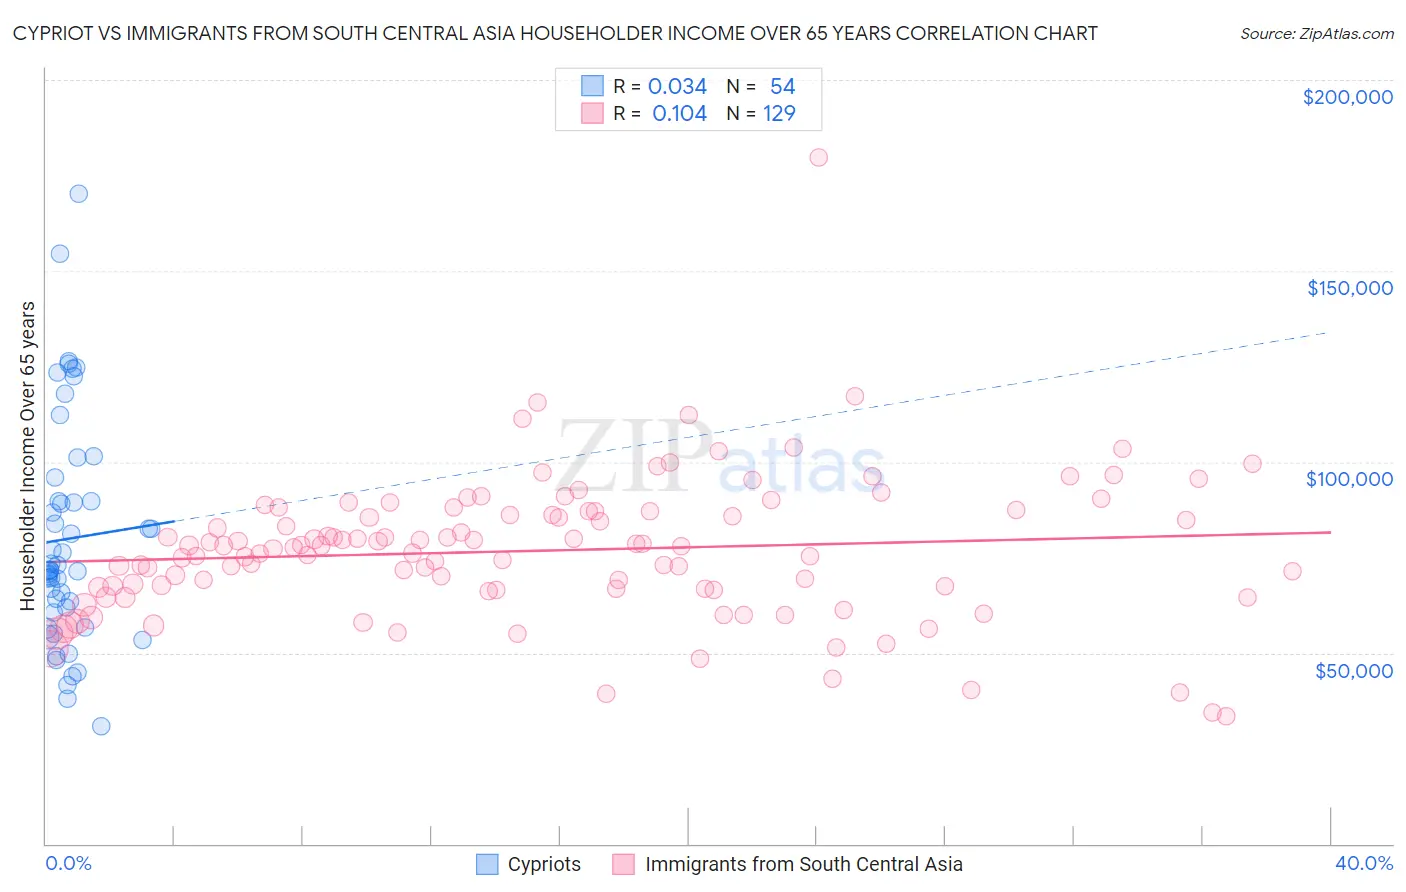 Cypriot vs Immigrants from South Central Asia Householder Income Over 65 years